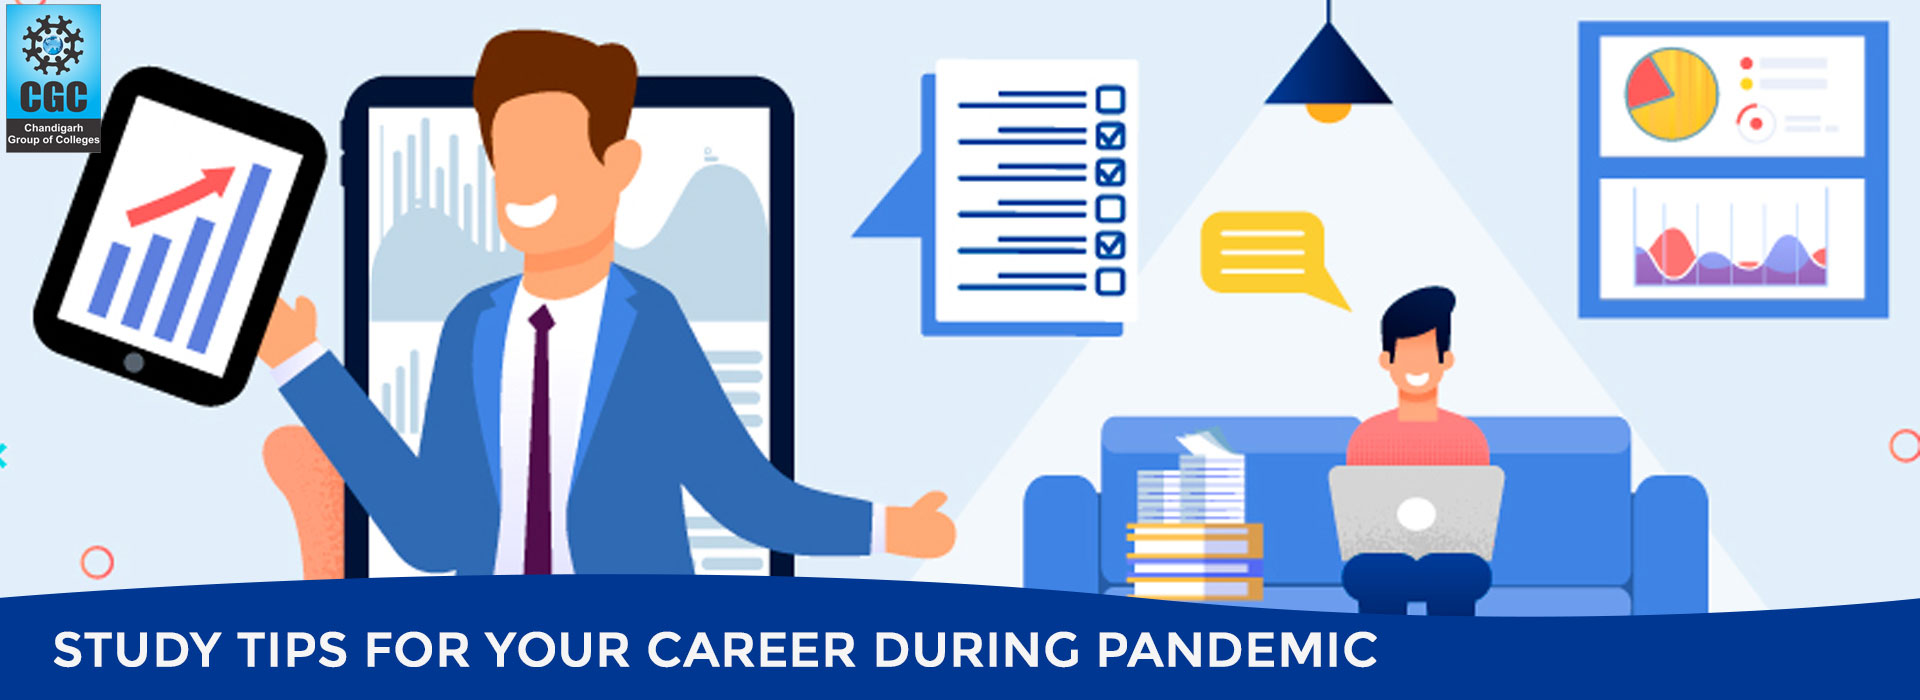 Study Tips for Your Career during Pandemic 